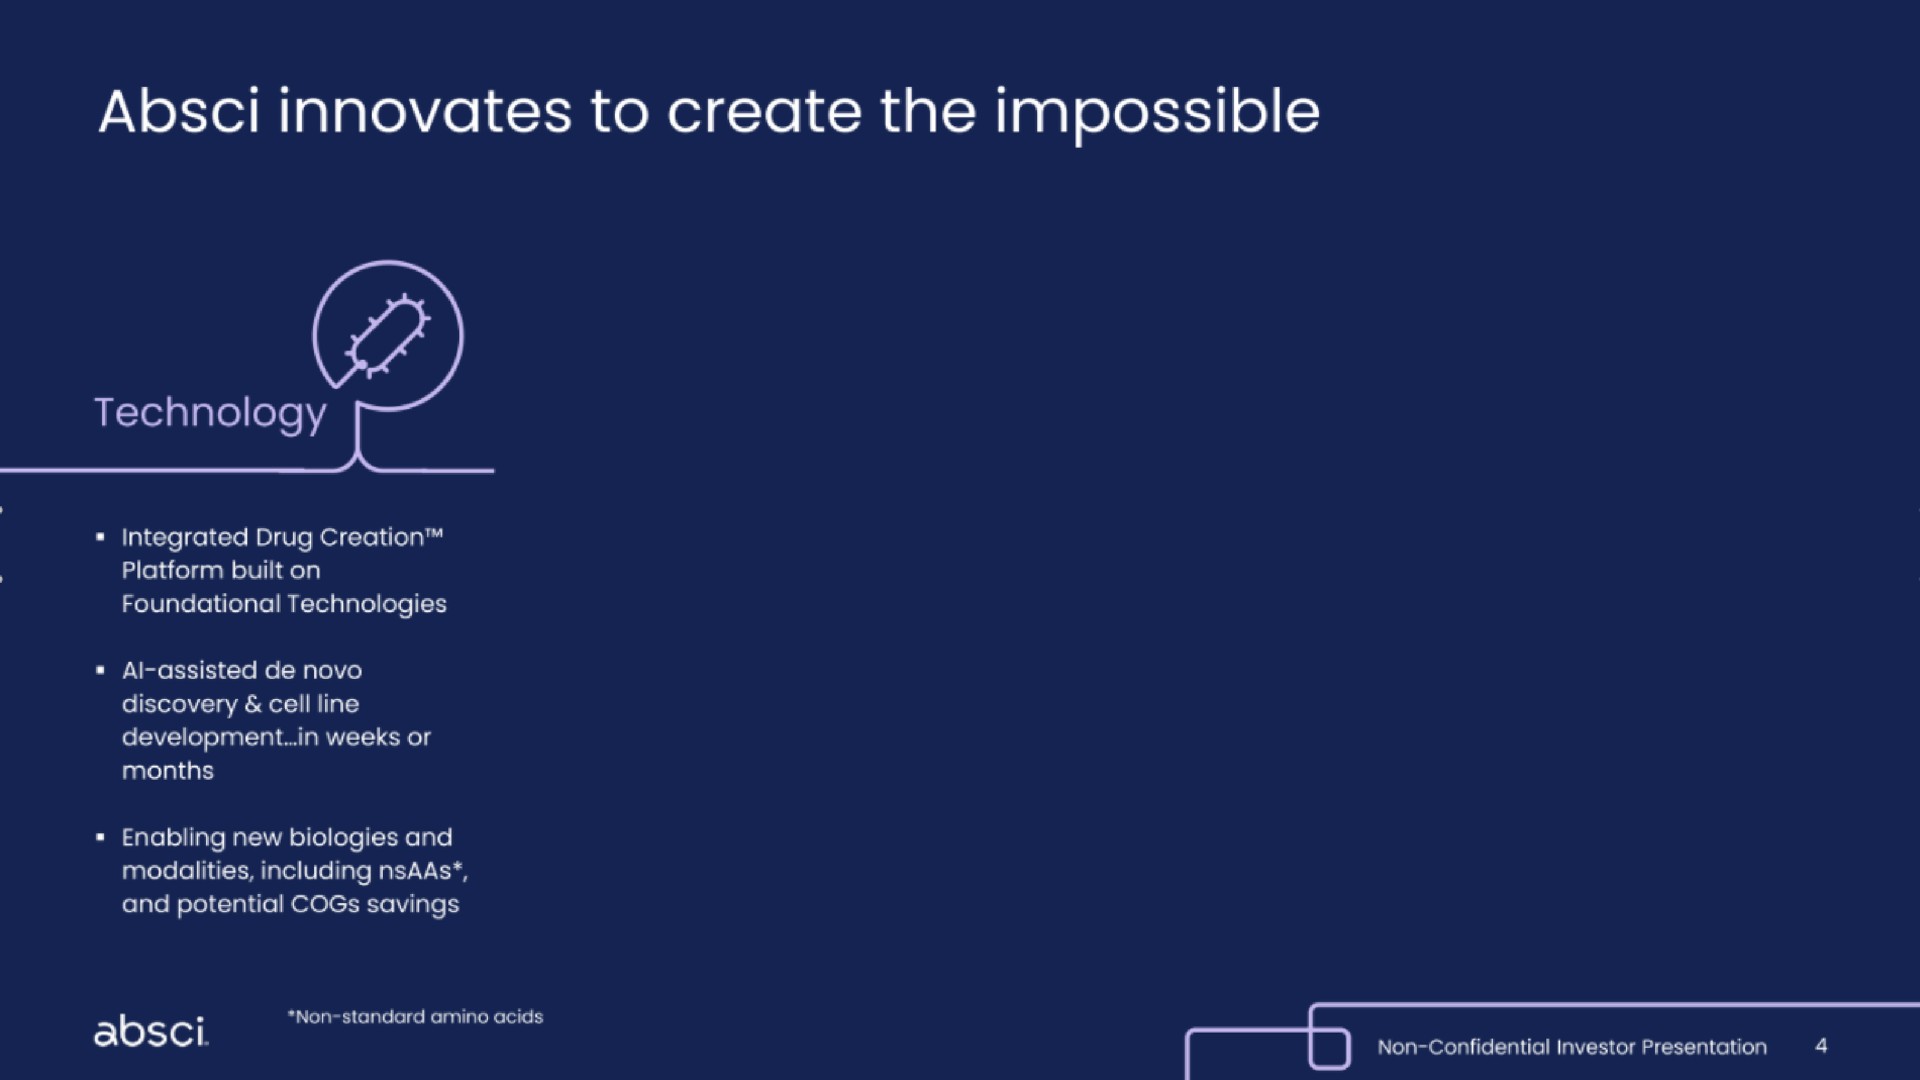 innovates to create the impossible | Absci